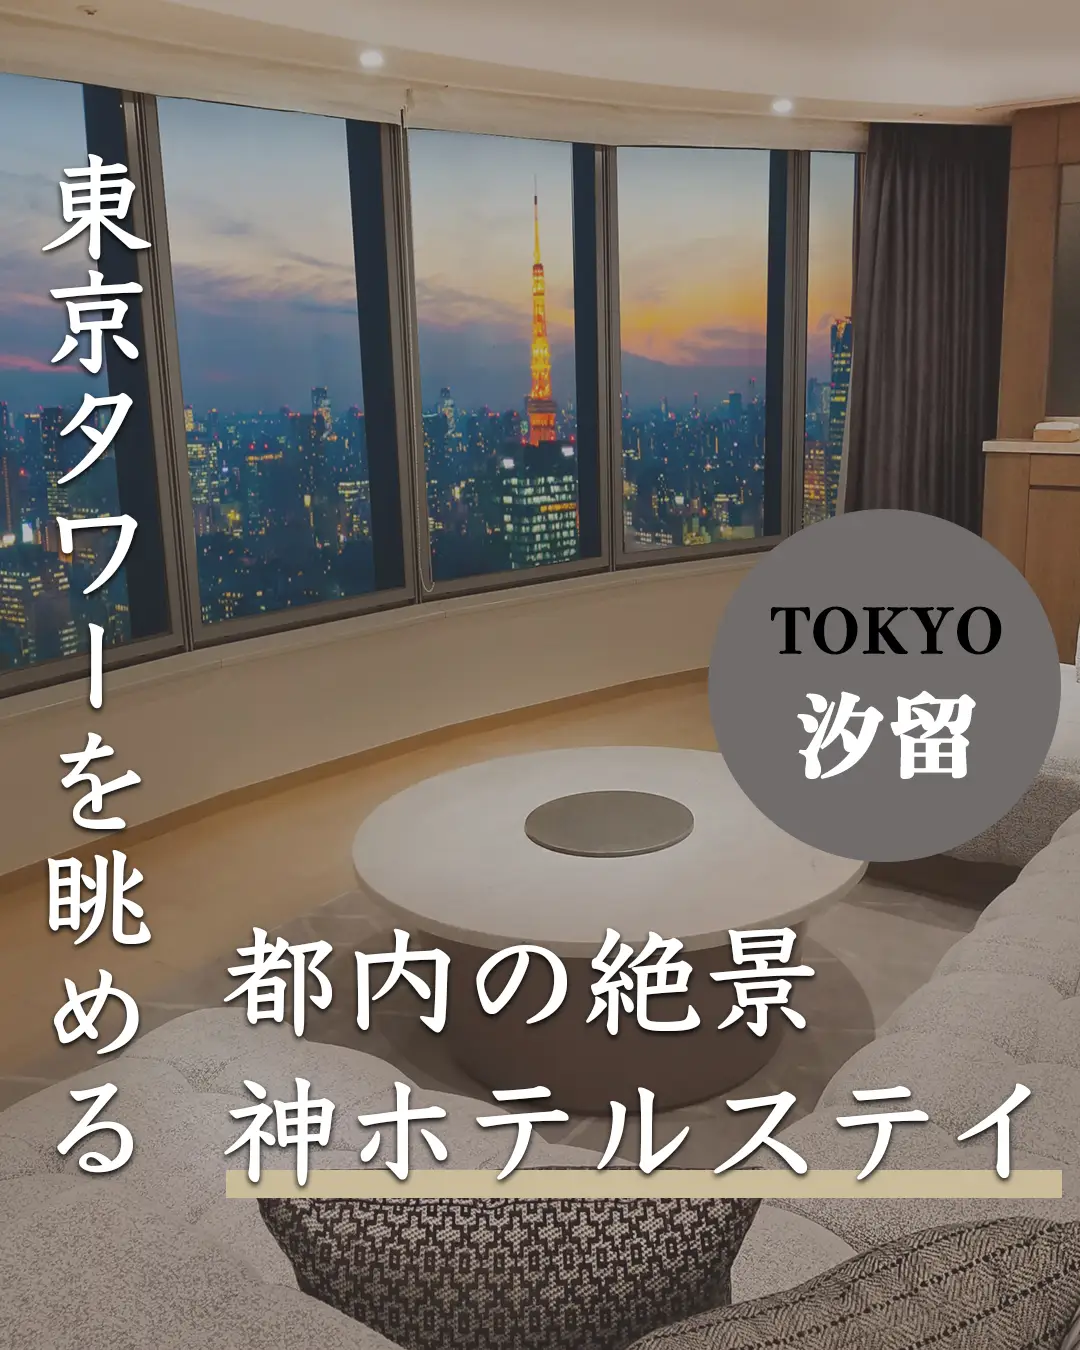 The God of the City Hotel with a view of Tokyo Tower from the